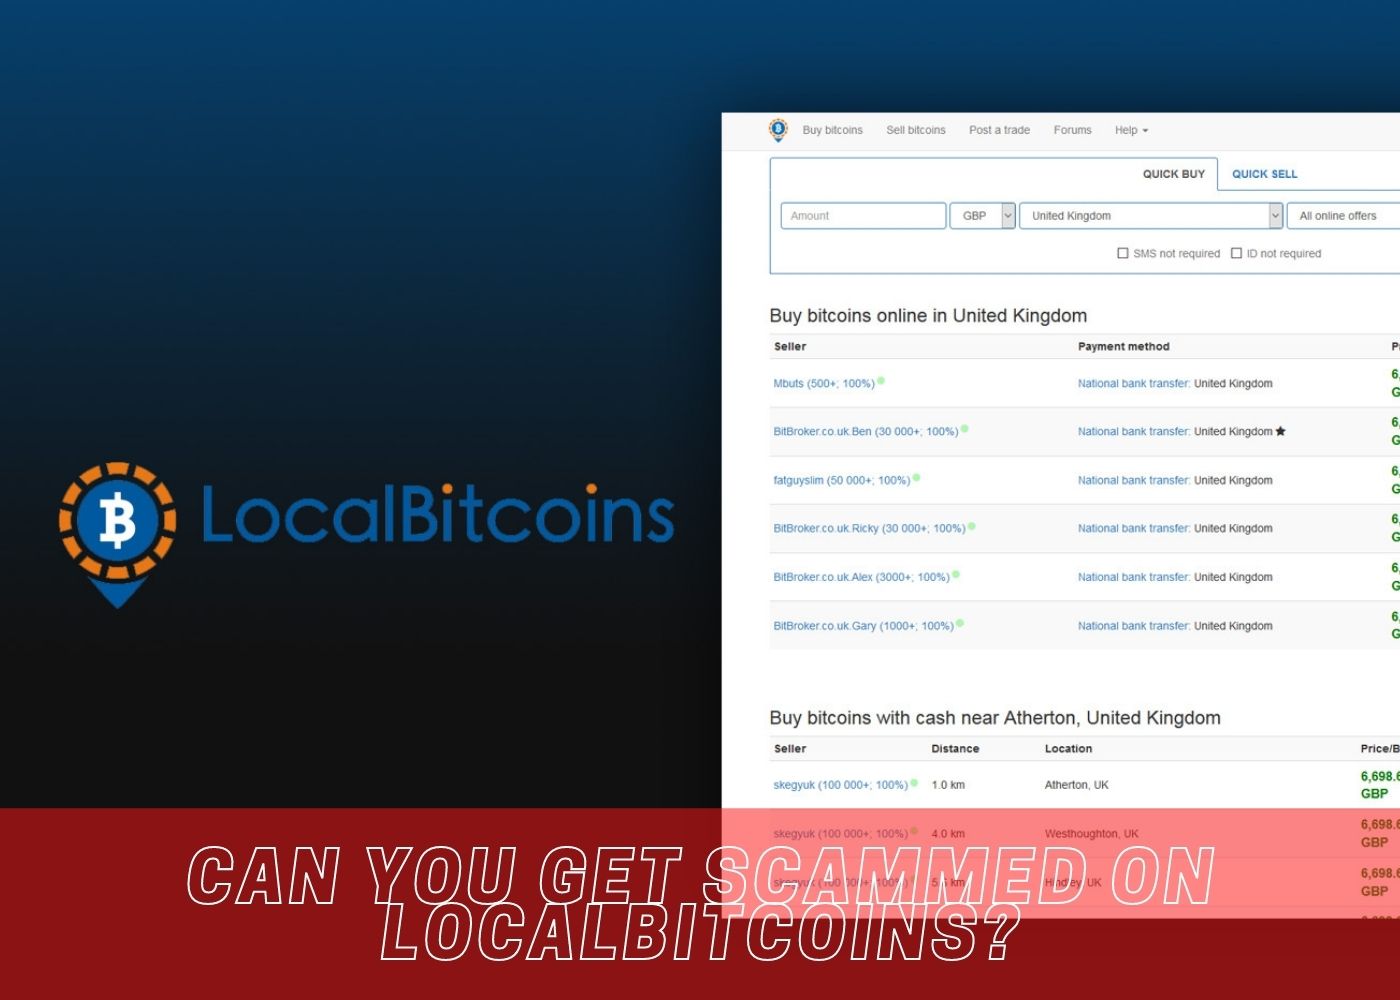 Can you get scammed on LocalBitcoins?